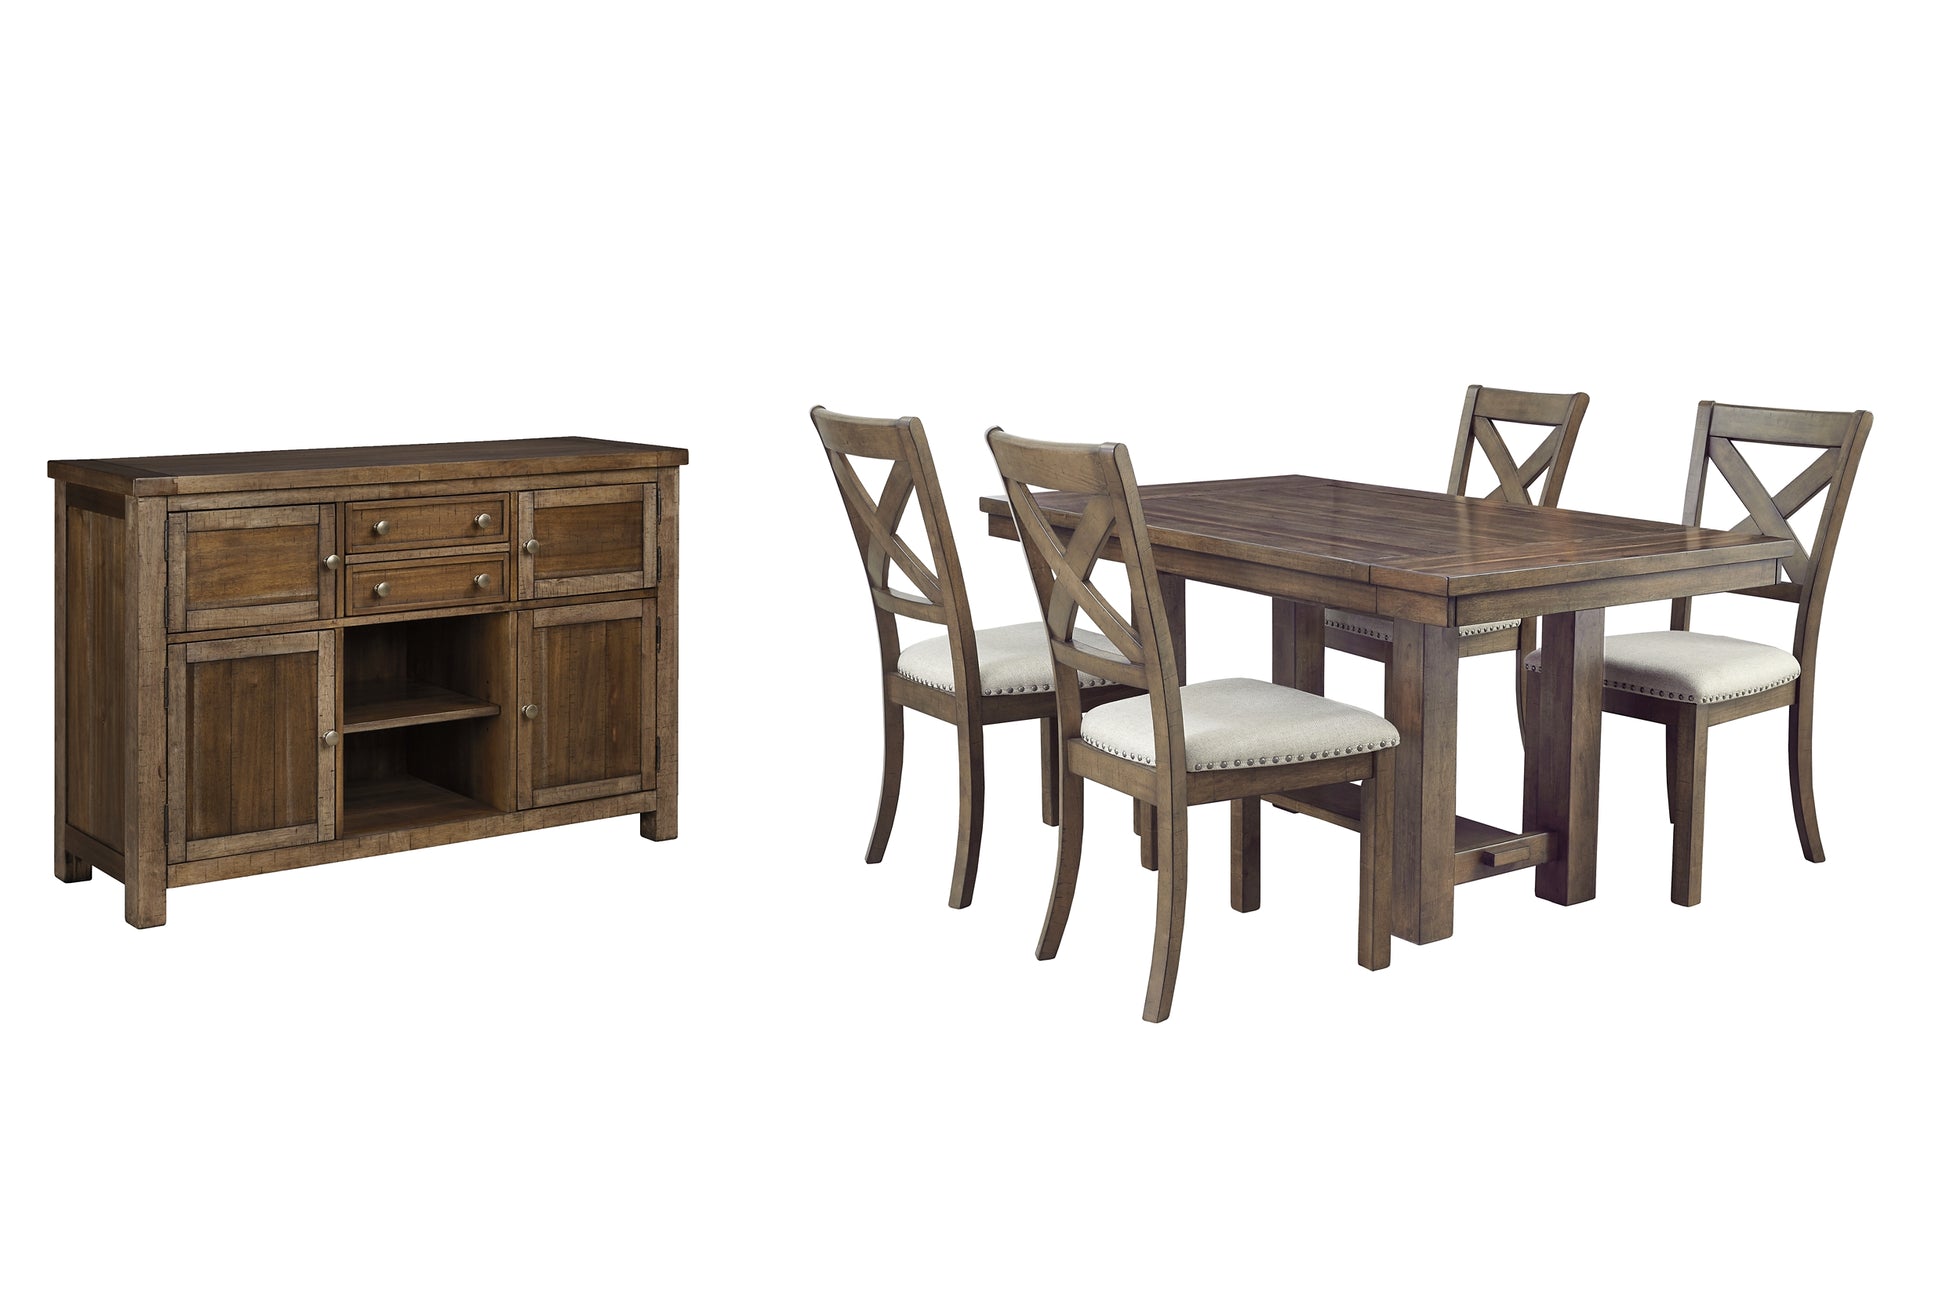 Moriville Dining Table and 4 Chairs with Storage Wilson Furniture (OH)  in Bridgeport, Ohio. Serving Bridgeport, Yorkville, Bellaire, & Avondale